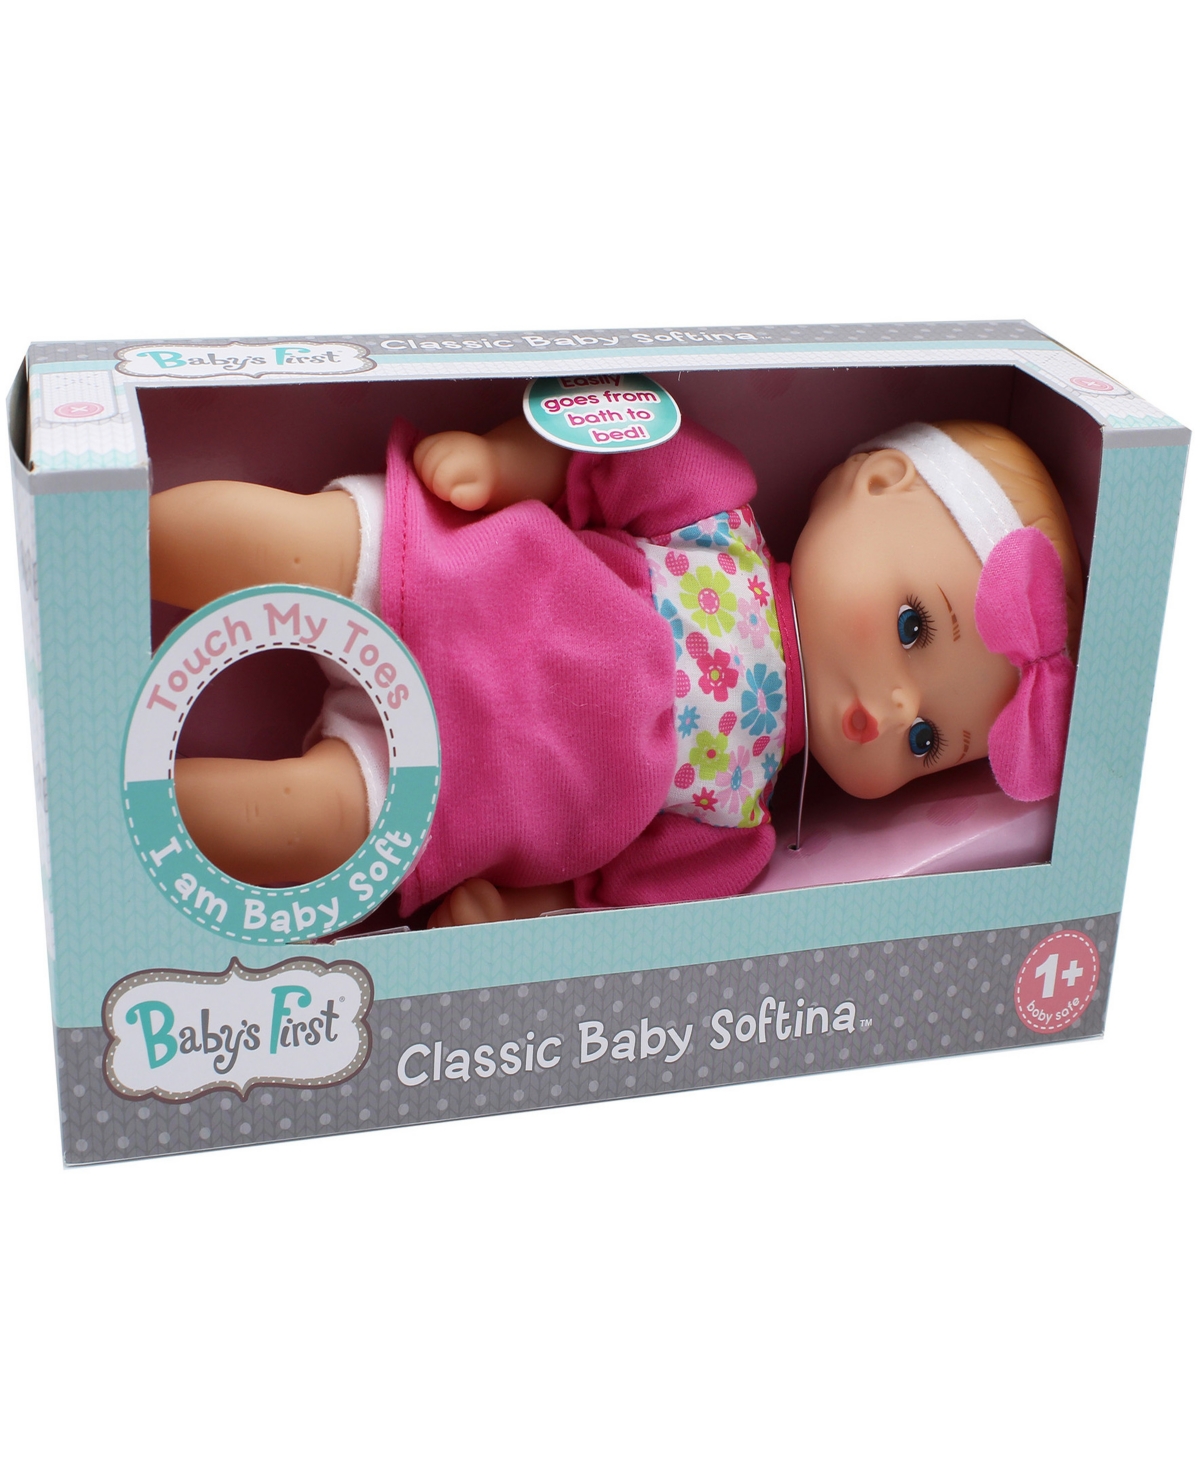 Baby's First By Nemcor Babies' Goldberger Doll 11" Classic Softina With Pink Foral Jumper Headband In Multi